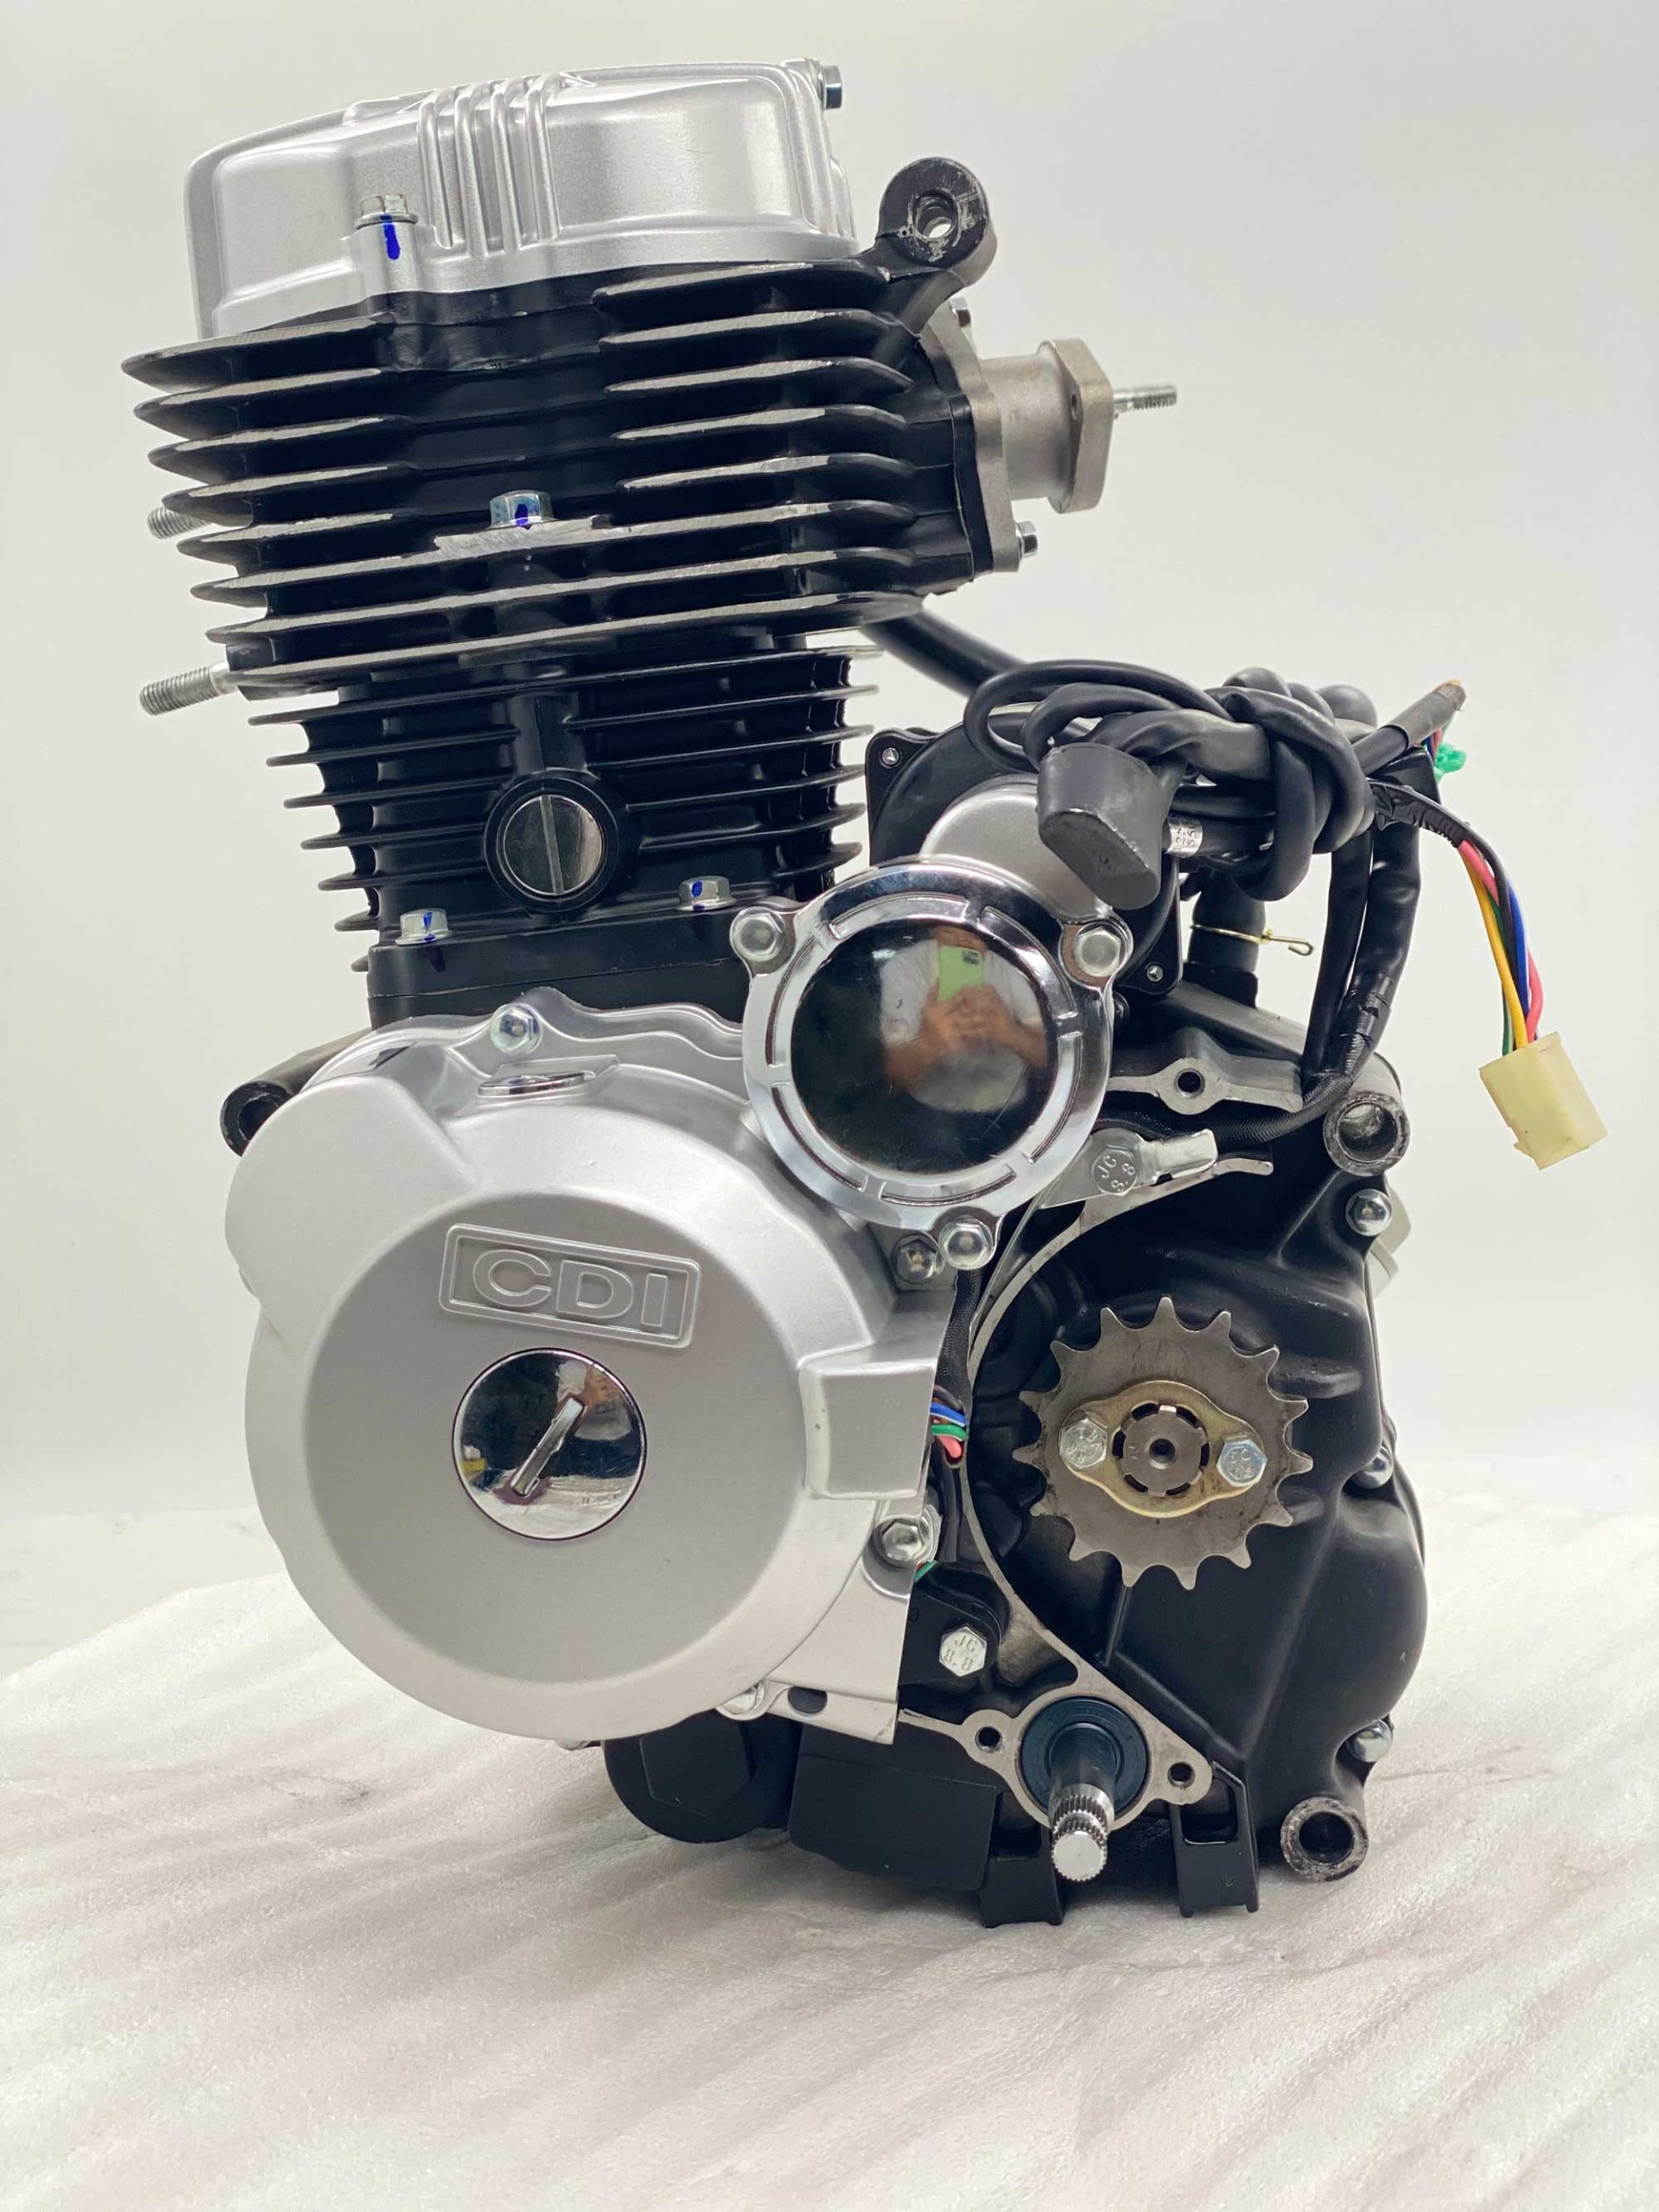 DAYANG Factory Kick Start Motorcycle Engine Tricycle 150cc Engine Packing Performance Parts China 49 Air Cooled 4 Stroke CDI 149